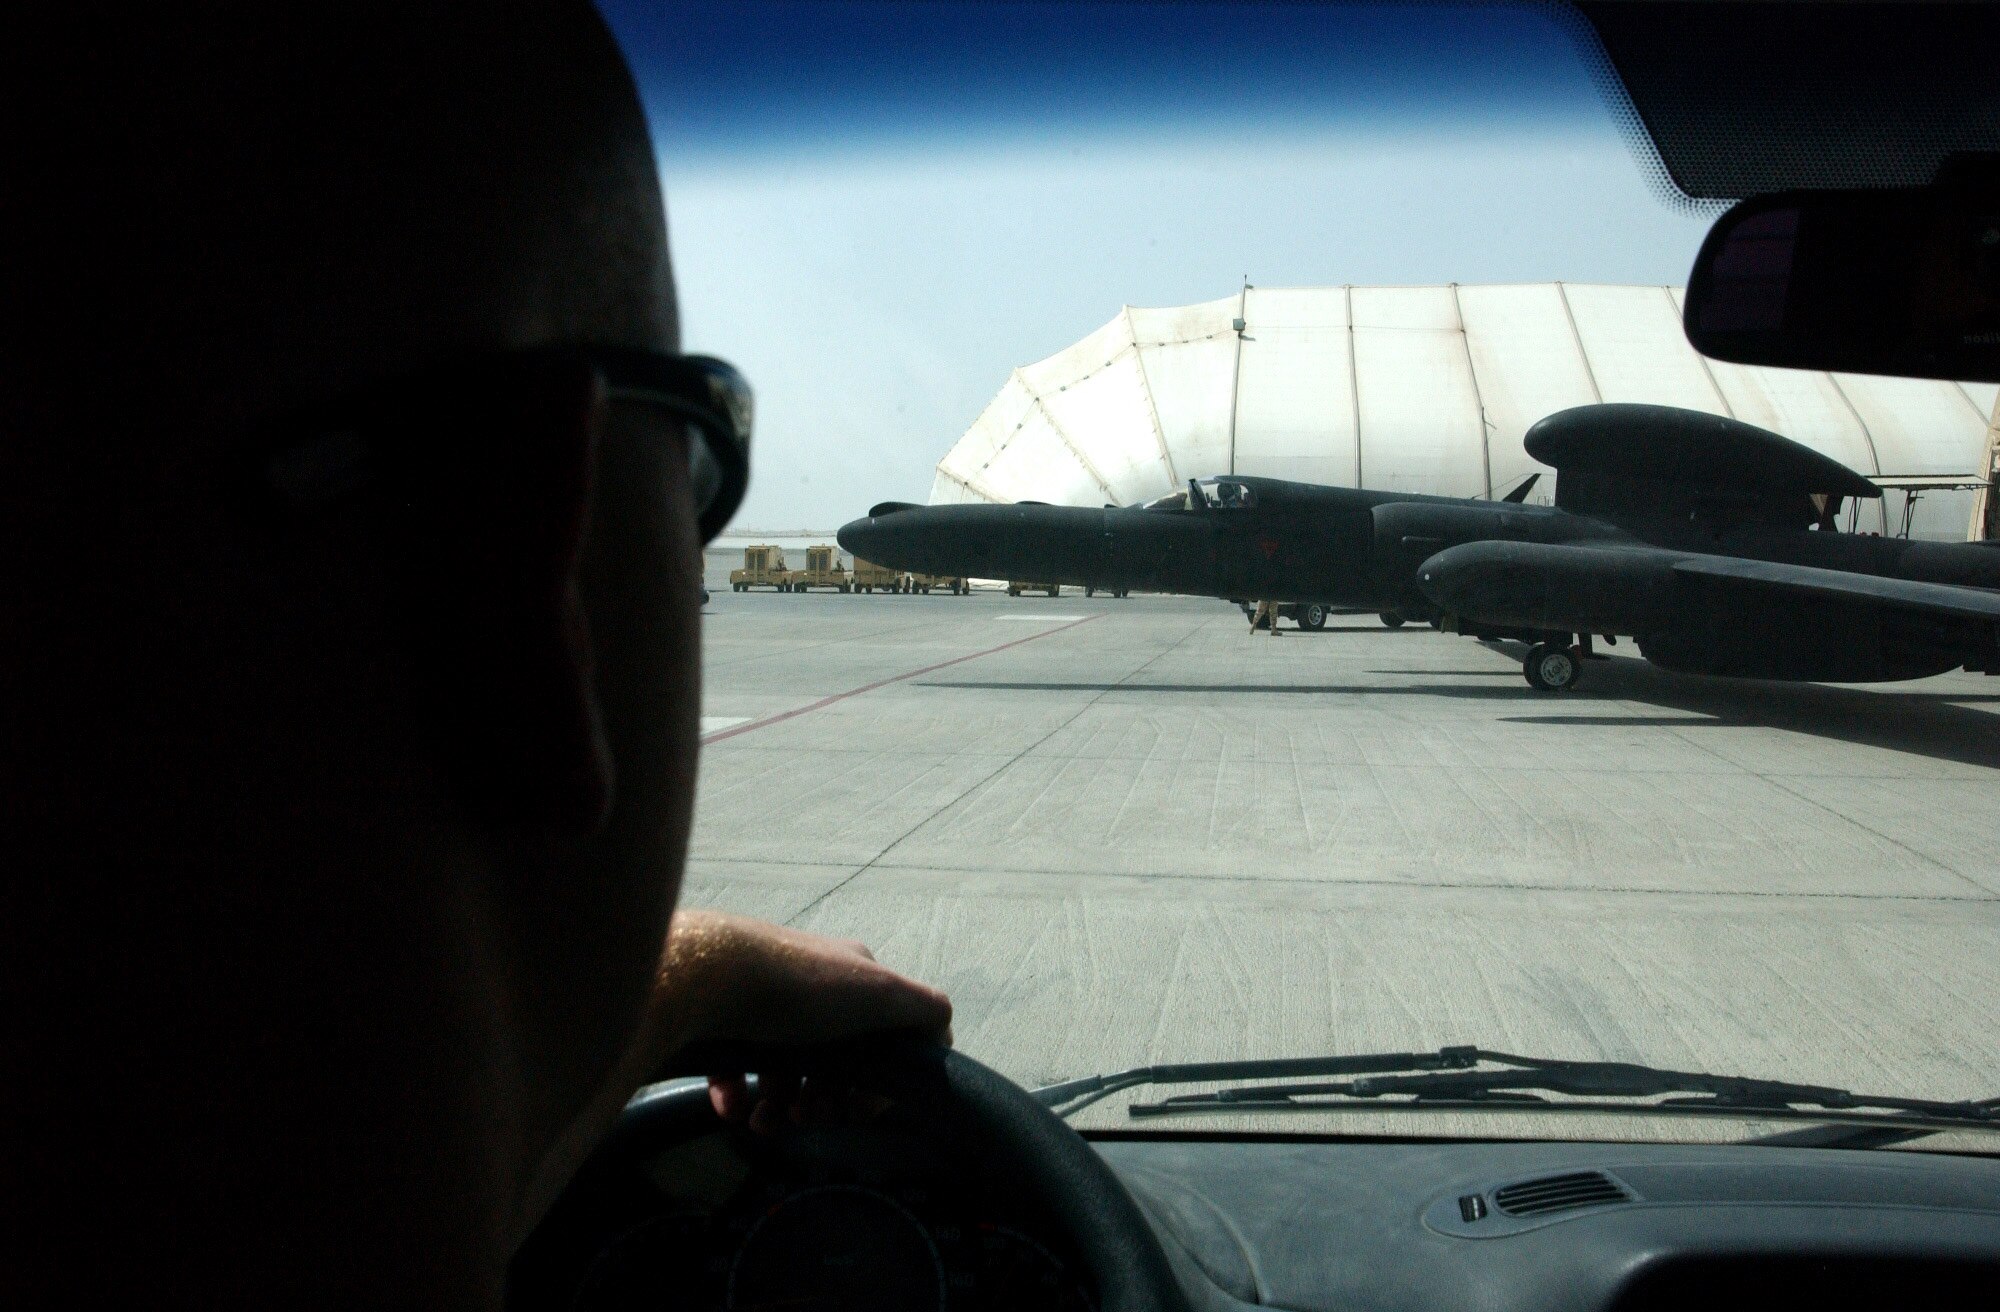 As Senior Airman Shawn Nyer watches, a U-2 piloted by Capt. Greg Hafner rolls out of its hangar at a forward-operating base in Southwest Asia Sept. 5. Airman Nyer helped Captain Hafner into the full-pressure suit and helmet needed for the mission. (U.S. Air Force photo/Master Sgt. Jason Tudor)
